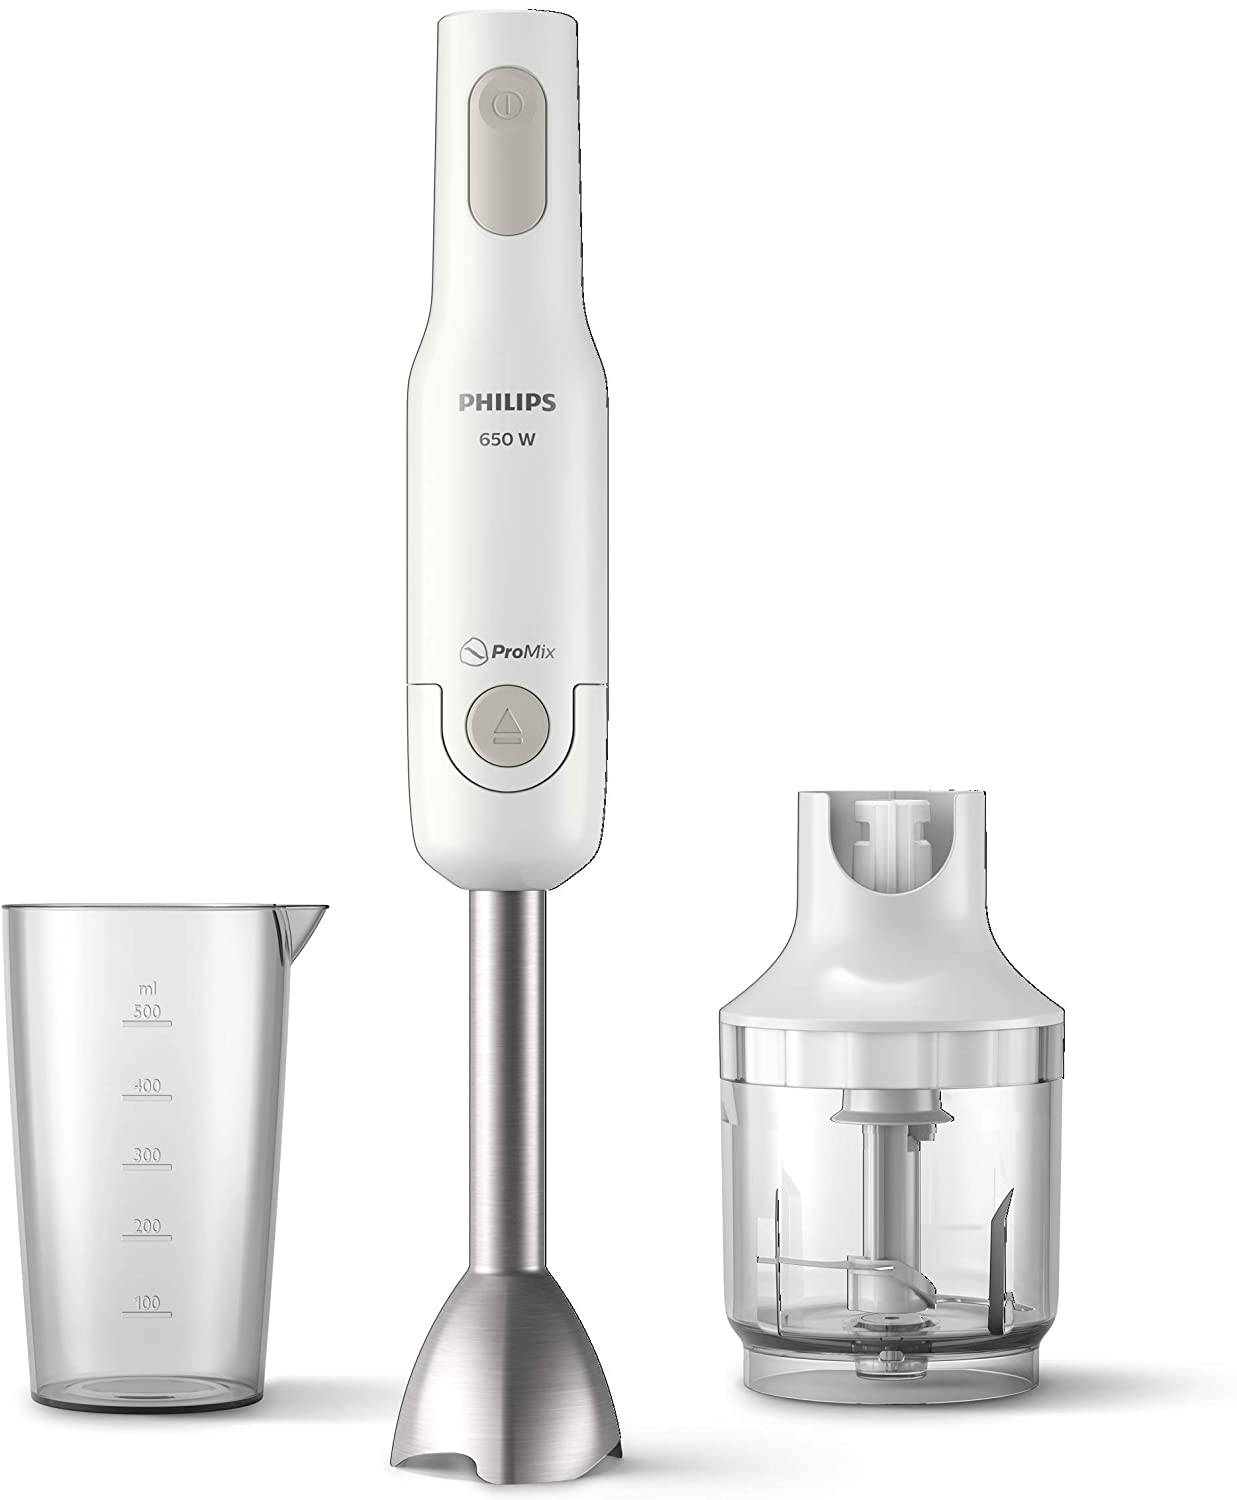 Philips Domestic Appliances PHILIPS ProMix Hand Blender with Plastic Bar, 650 W, Splash Guard, Includes Measuring Cup